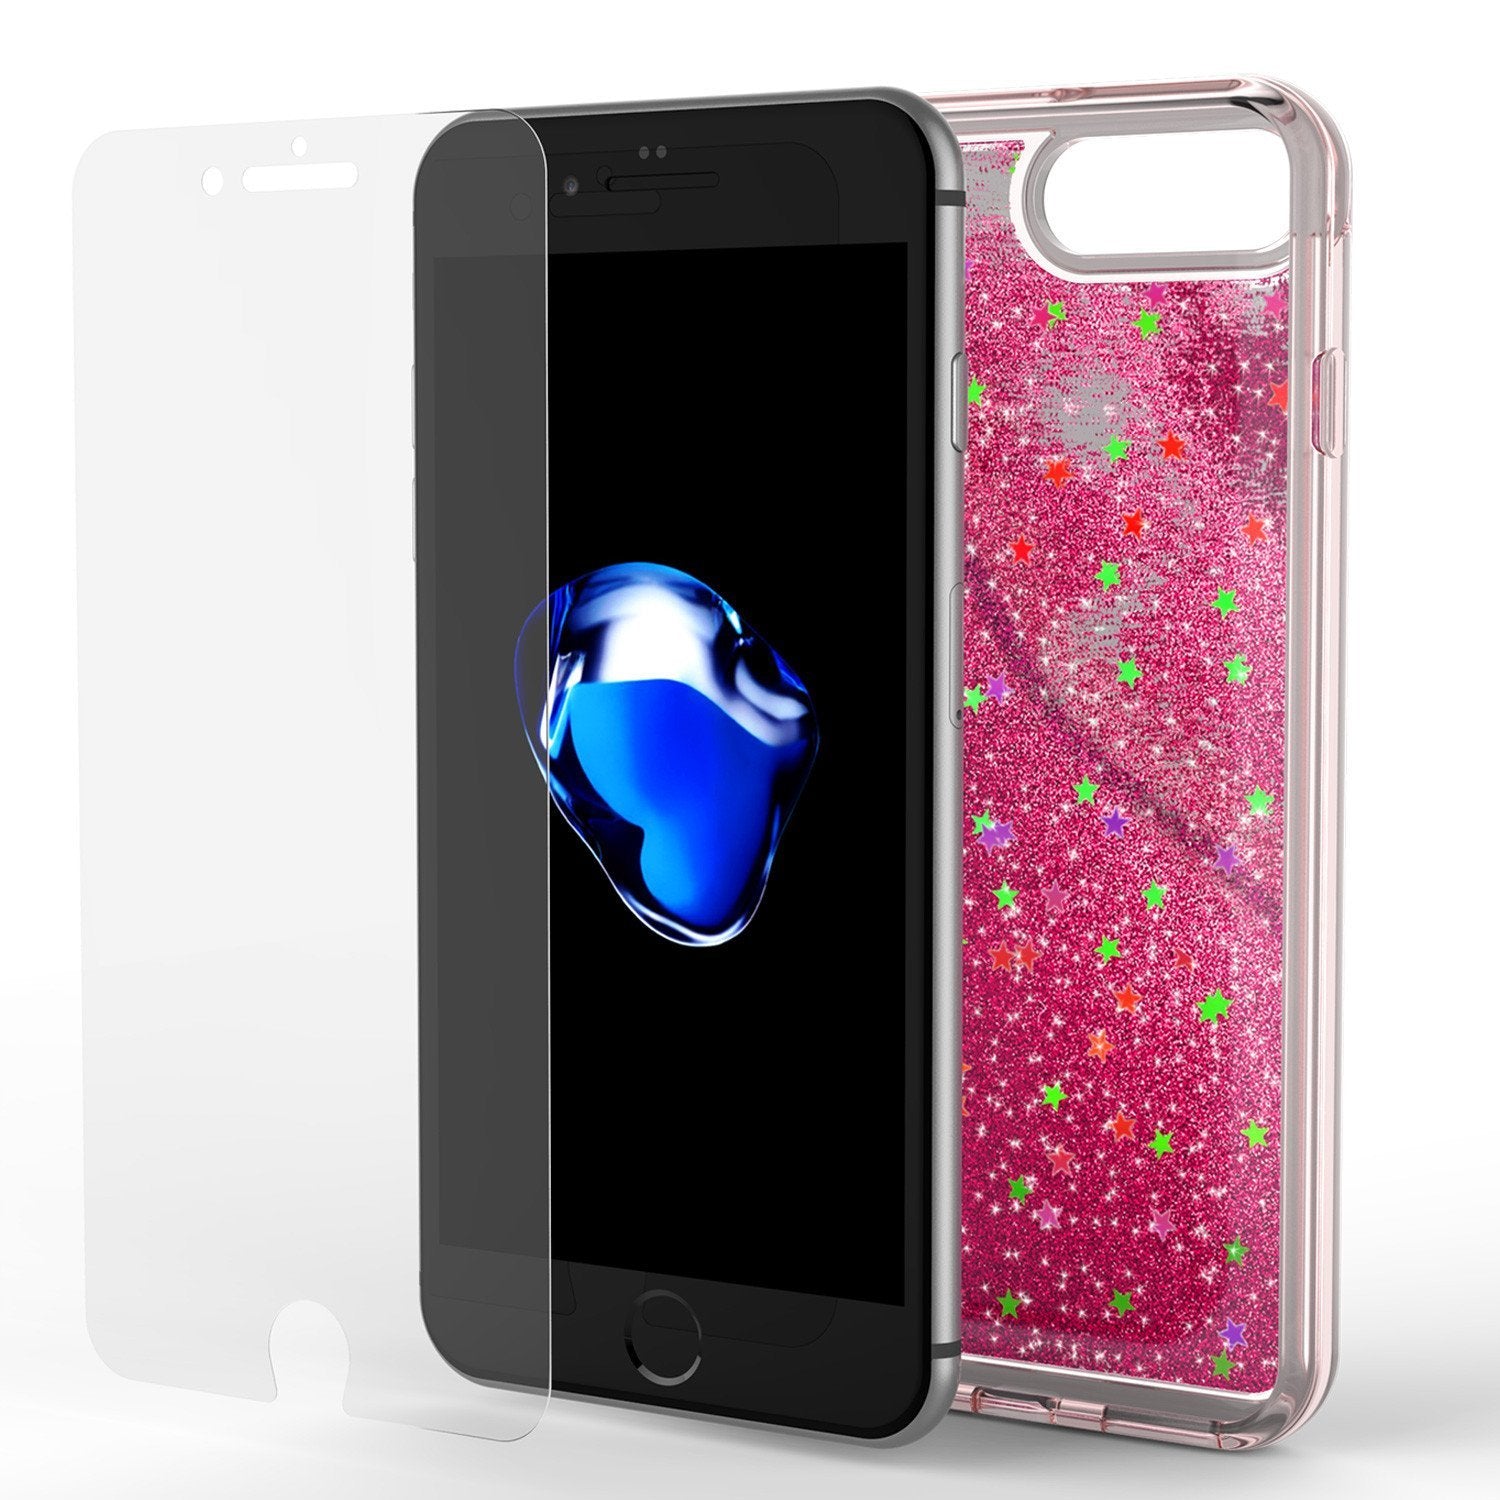 iPhone 8+ Plus Case, PunkCase LIQUID Pink Series, Protective Dual Layer Floating Glitter Cover